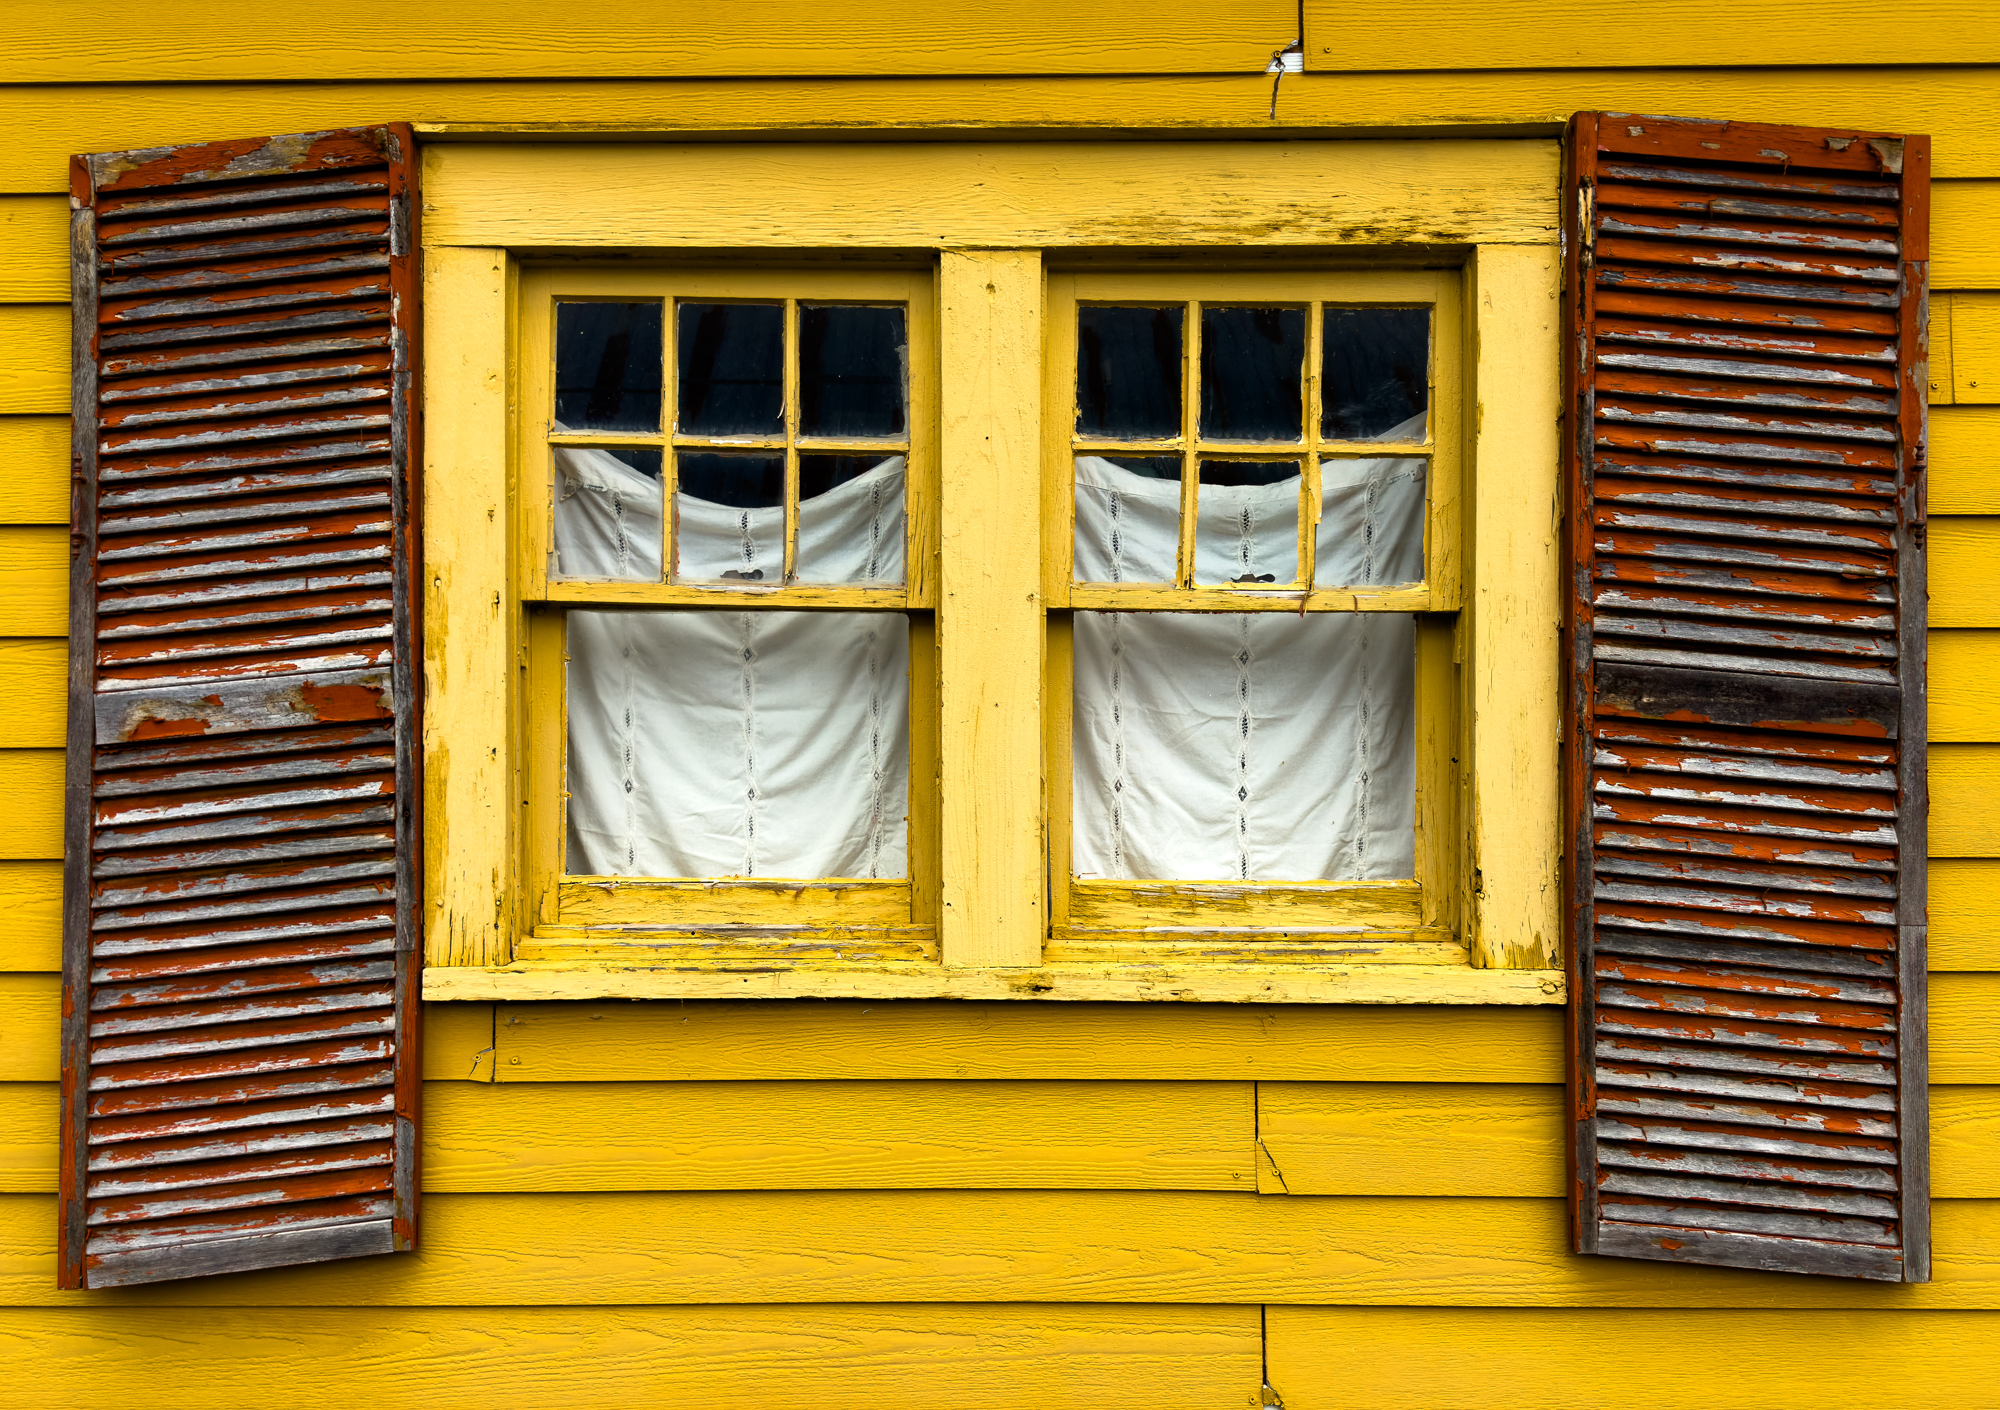 I am always looking for a shot. Thought this window and sagging shutters looked pretty cool